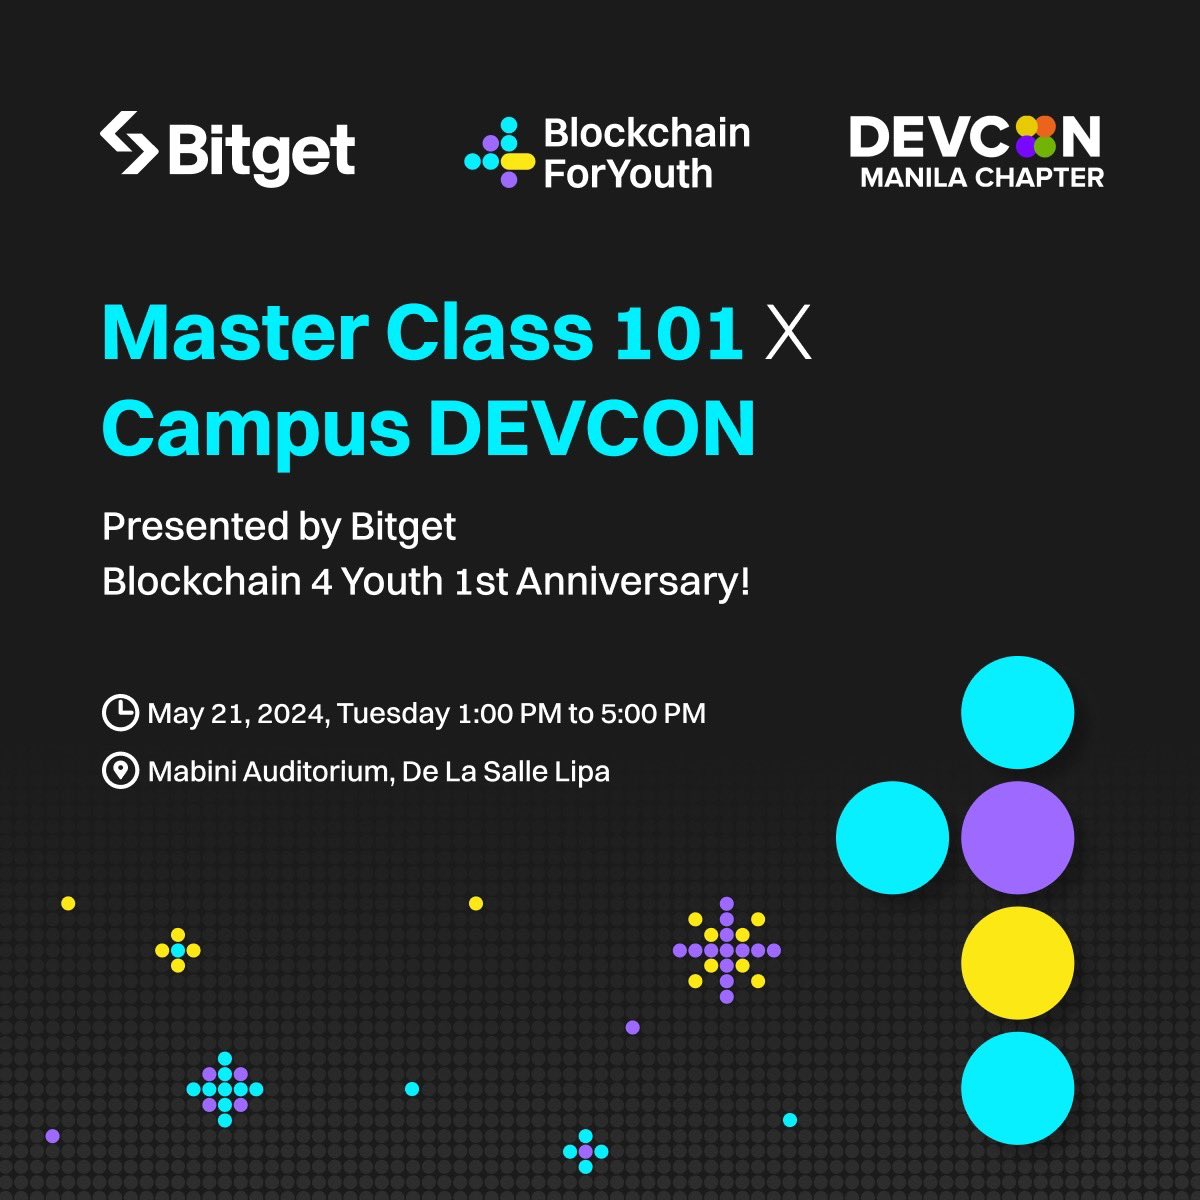 🚍 Campus DEVCON Masterclass 101 Presented by #Bitget 🇵🇭 Masterclass 101: DEVCON and Bitget have partnered up with each other under similar initiatives to progress and amplify Filipino's exposure to emerging technologies and eventually build more opportunities for the country.